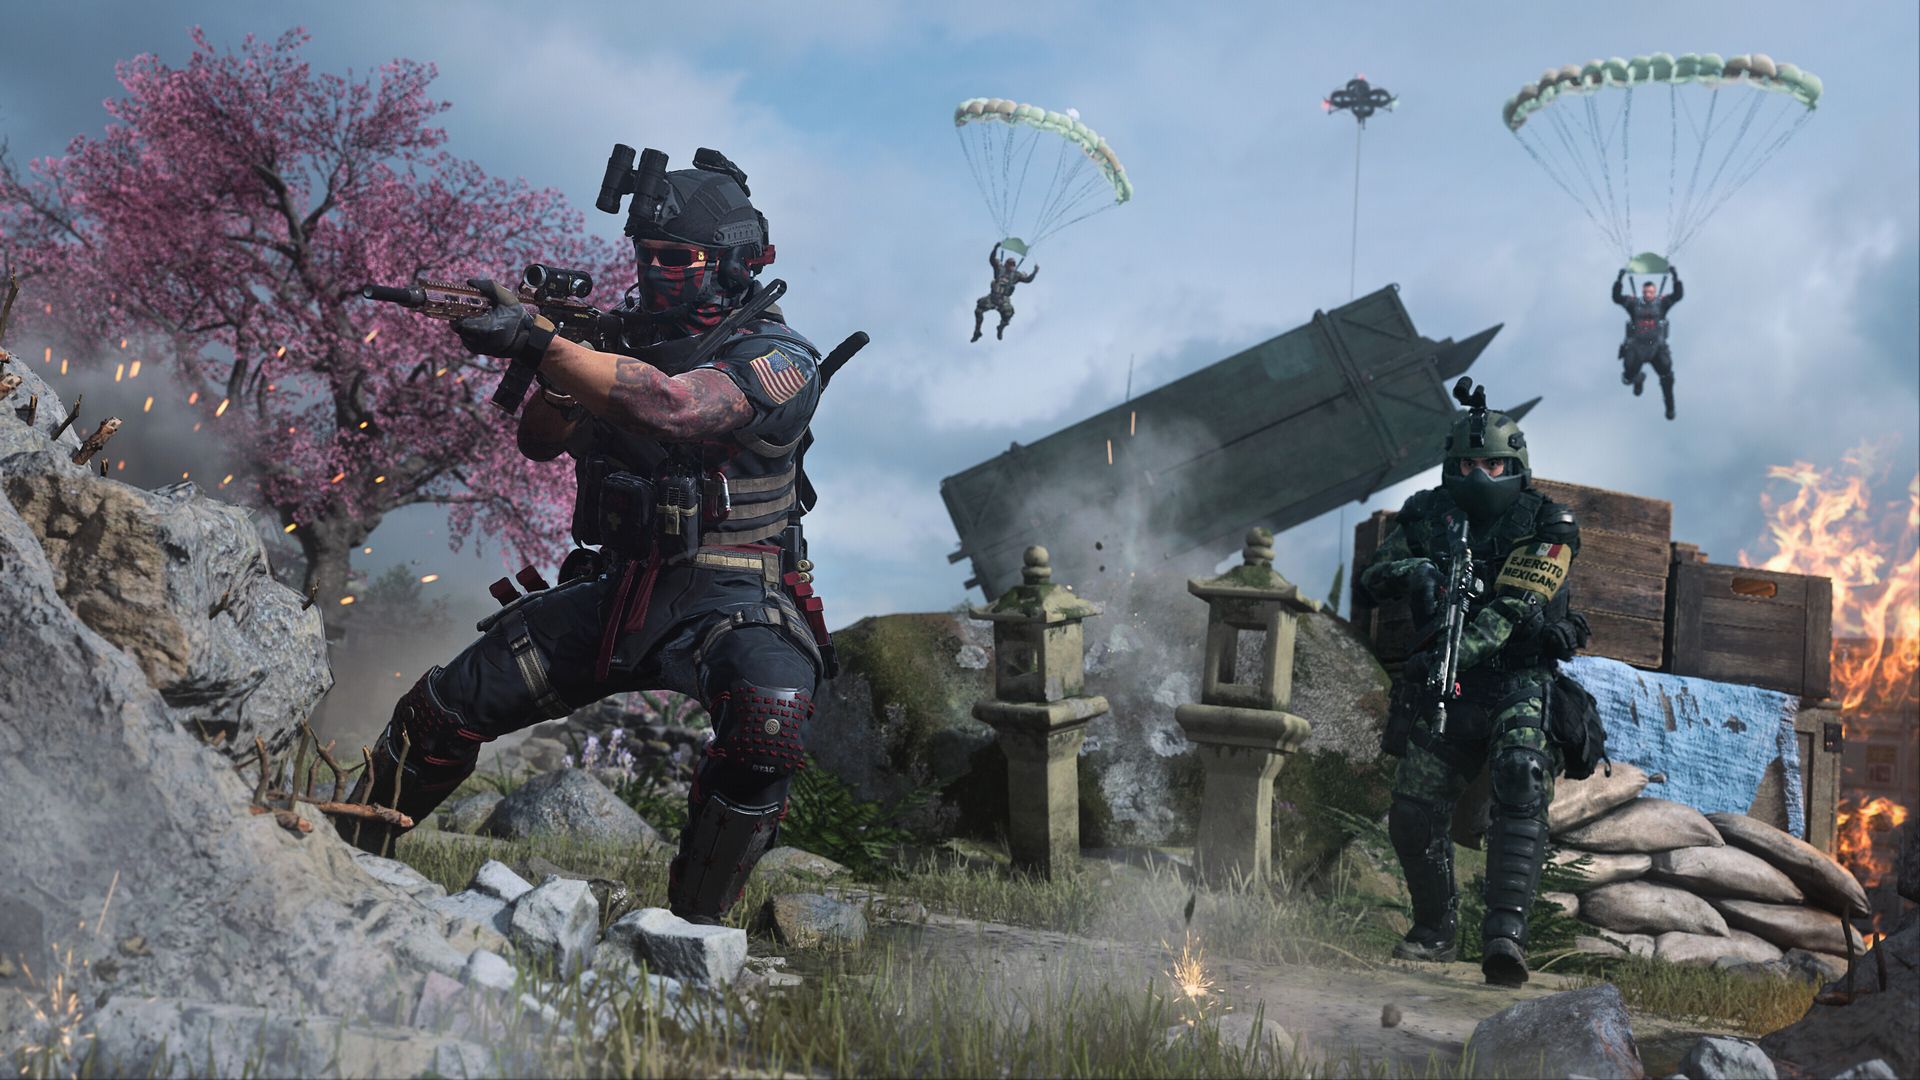 Screenshot of two heavily armored gunmen in a scene from Call of Duty